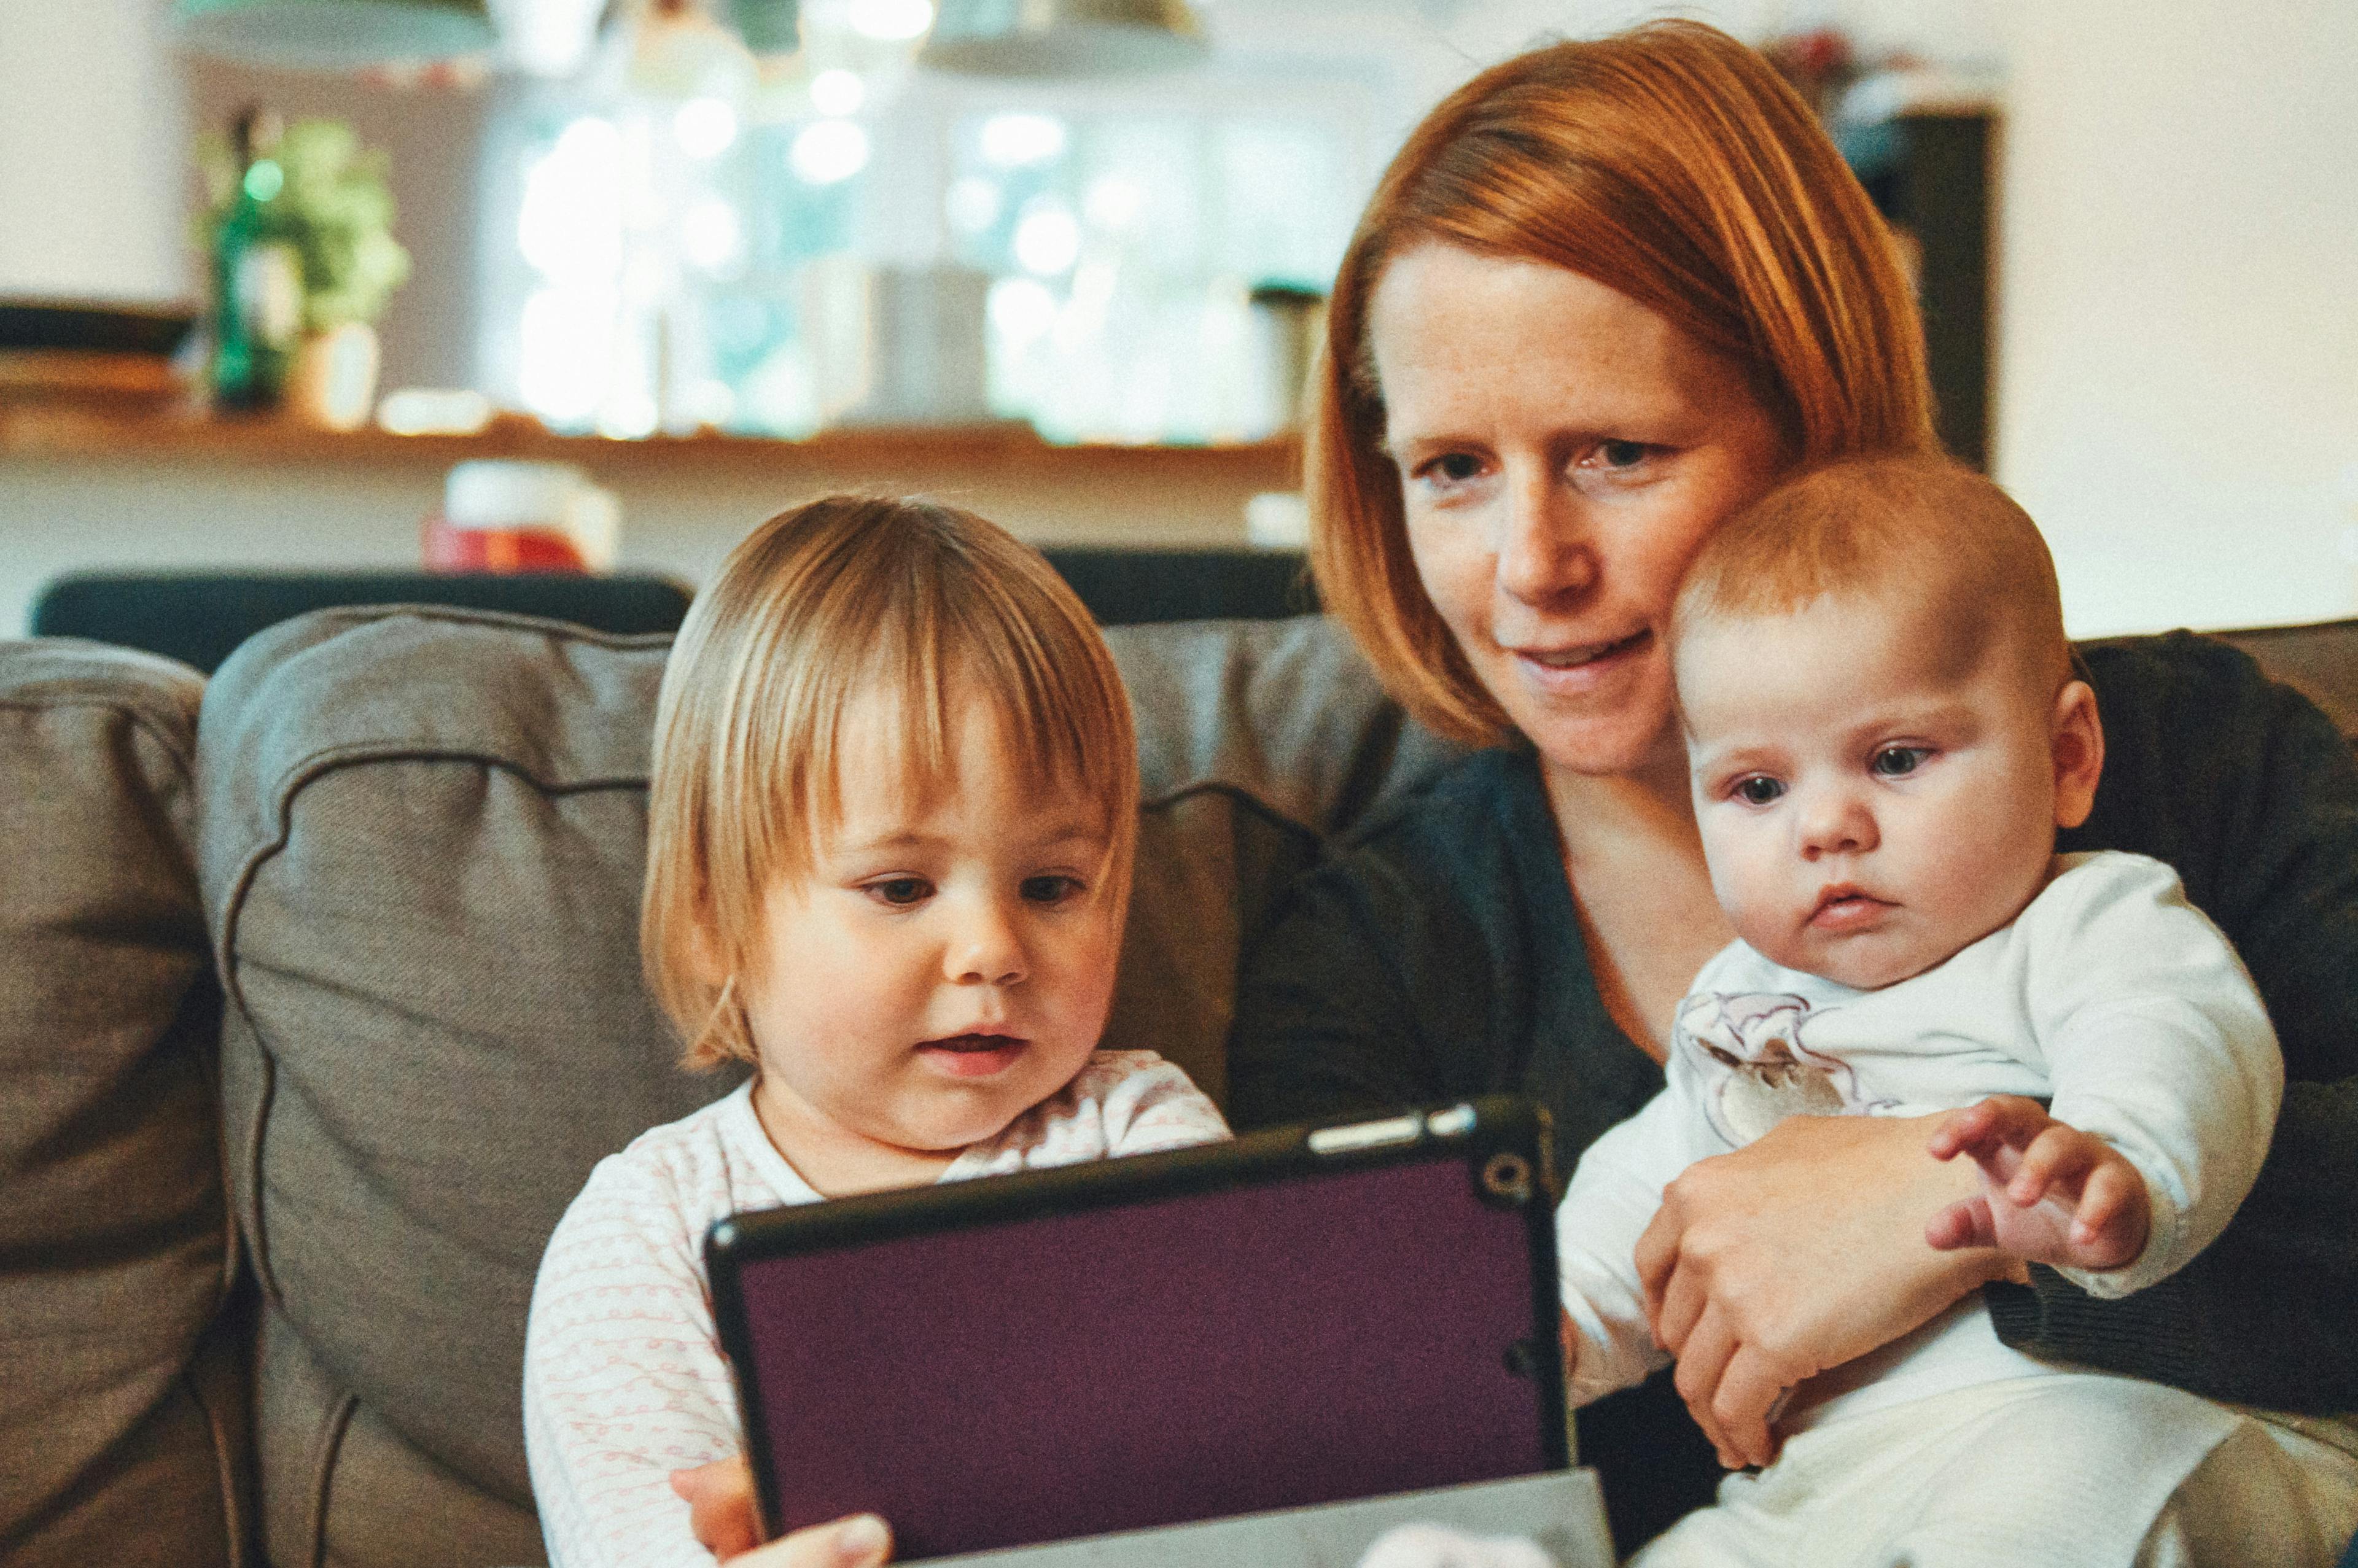 A mother and her two young children using a tablet together